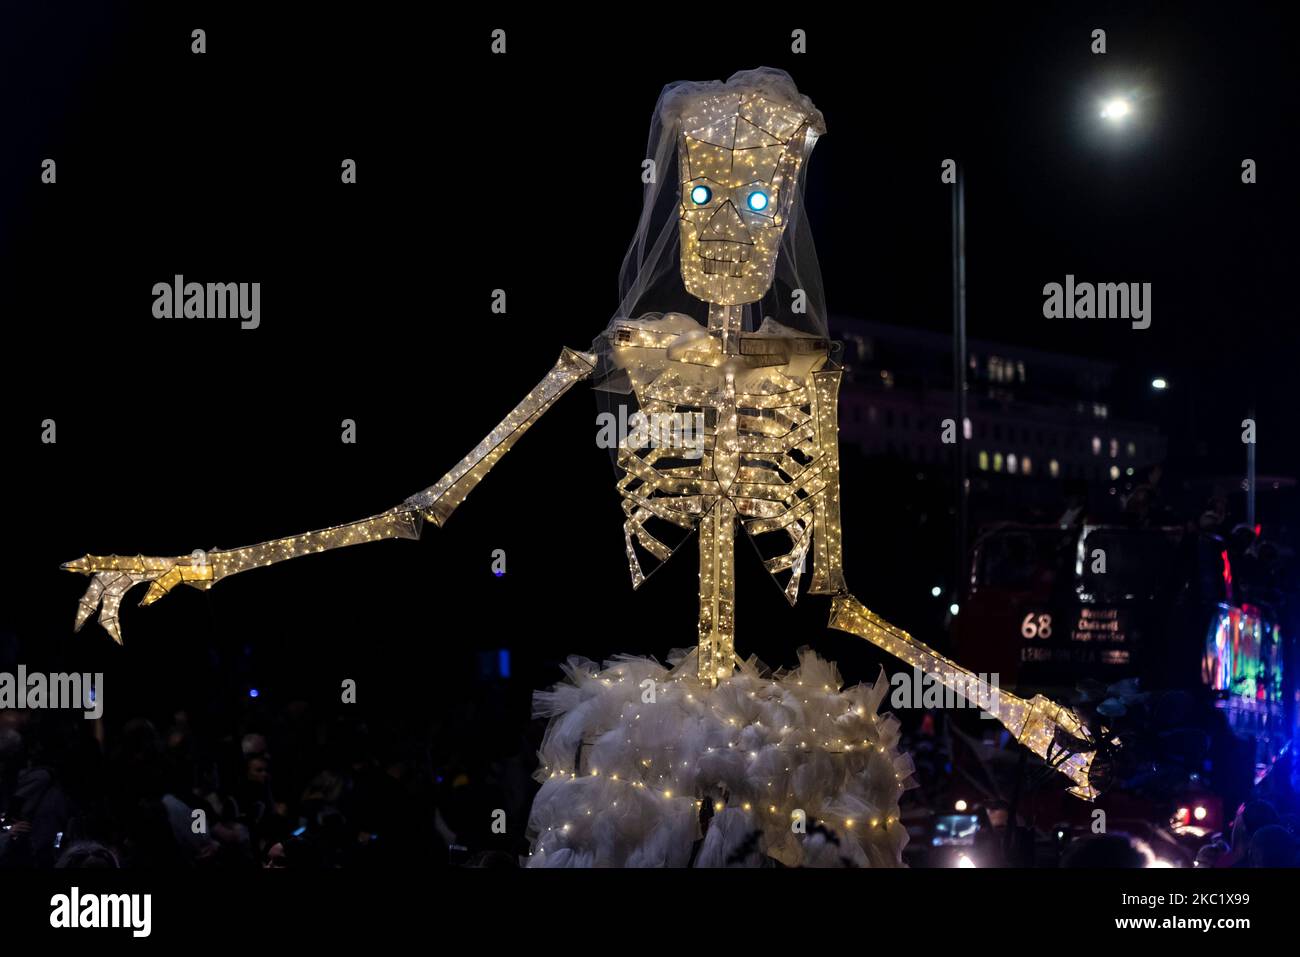 Corpse bride at the Halloween Parade in Southend on Sea, Essex, UK. Large illuminated figure by local artist sculptor Dave Taylor Stock Photo